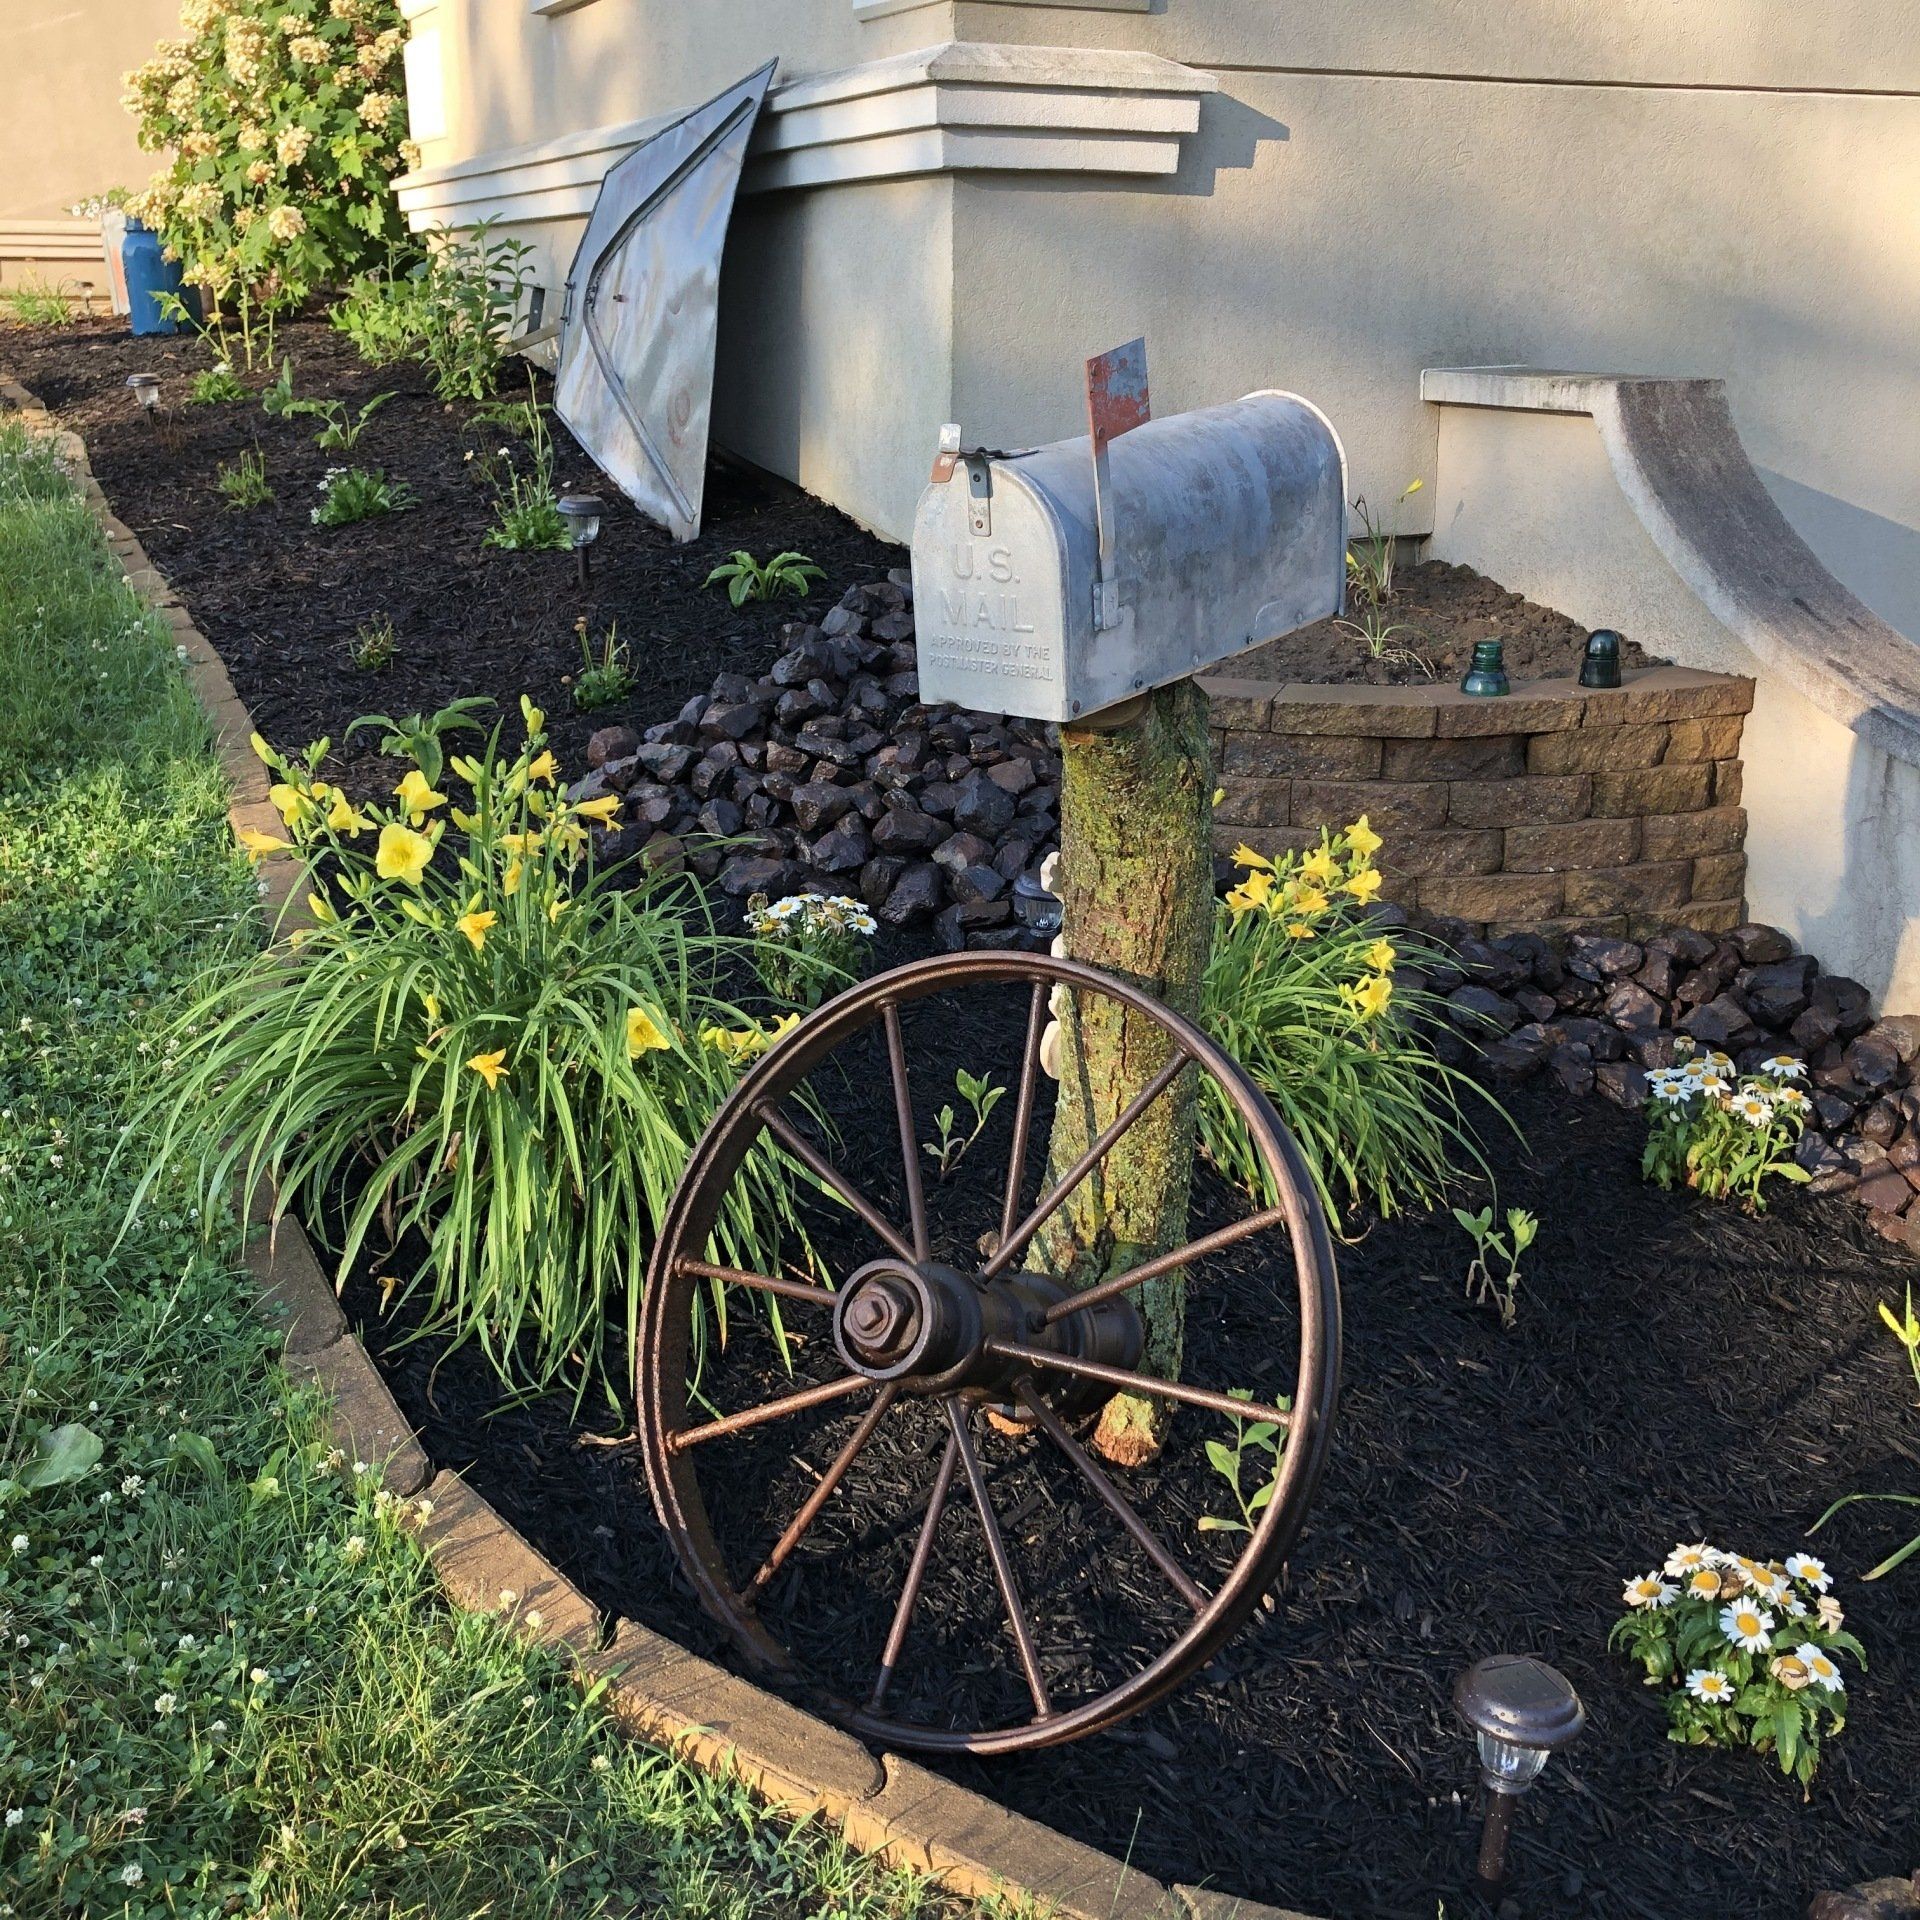 Old wheel from the Redd farm; mailbox from Linda Rees.